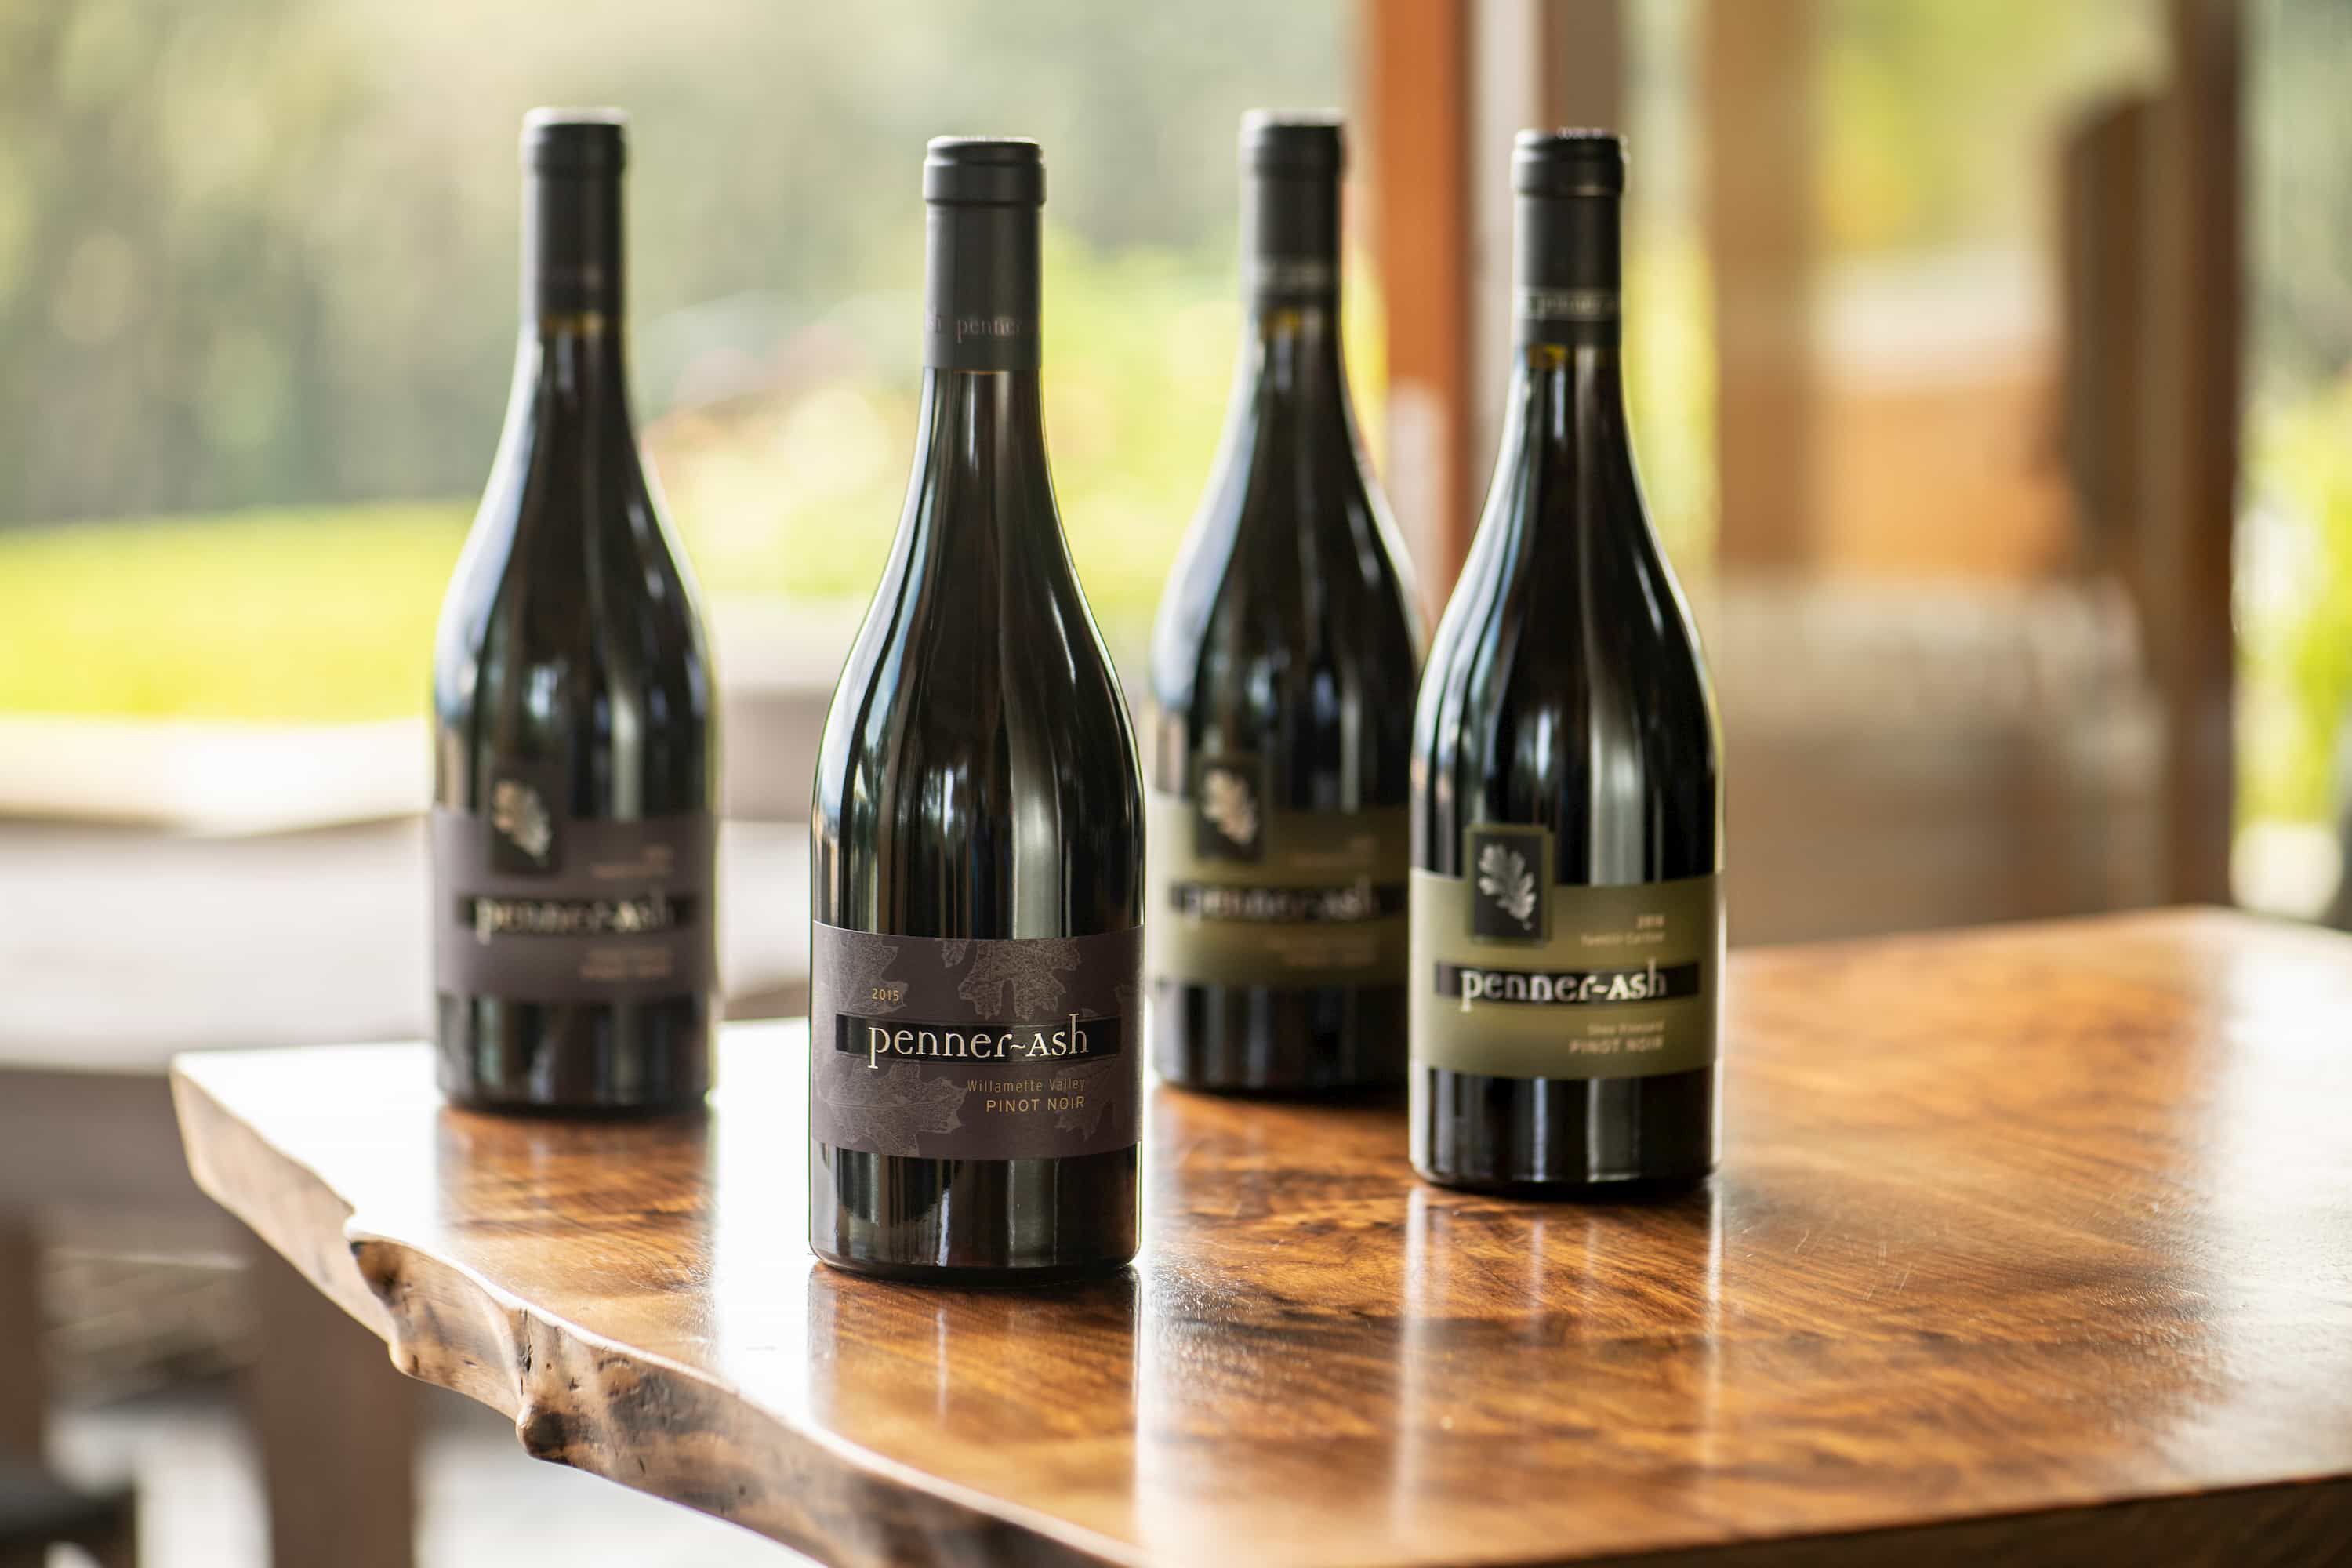 Four bottles of Penner-Ash wine standing on a wooden table.